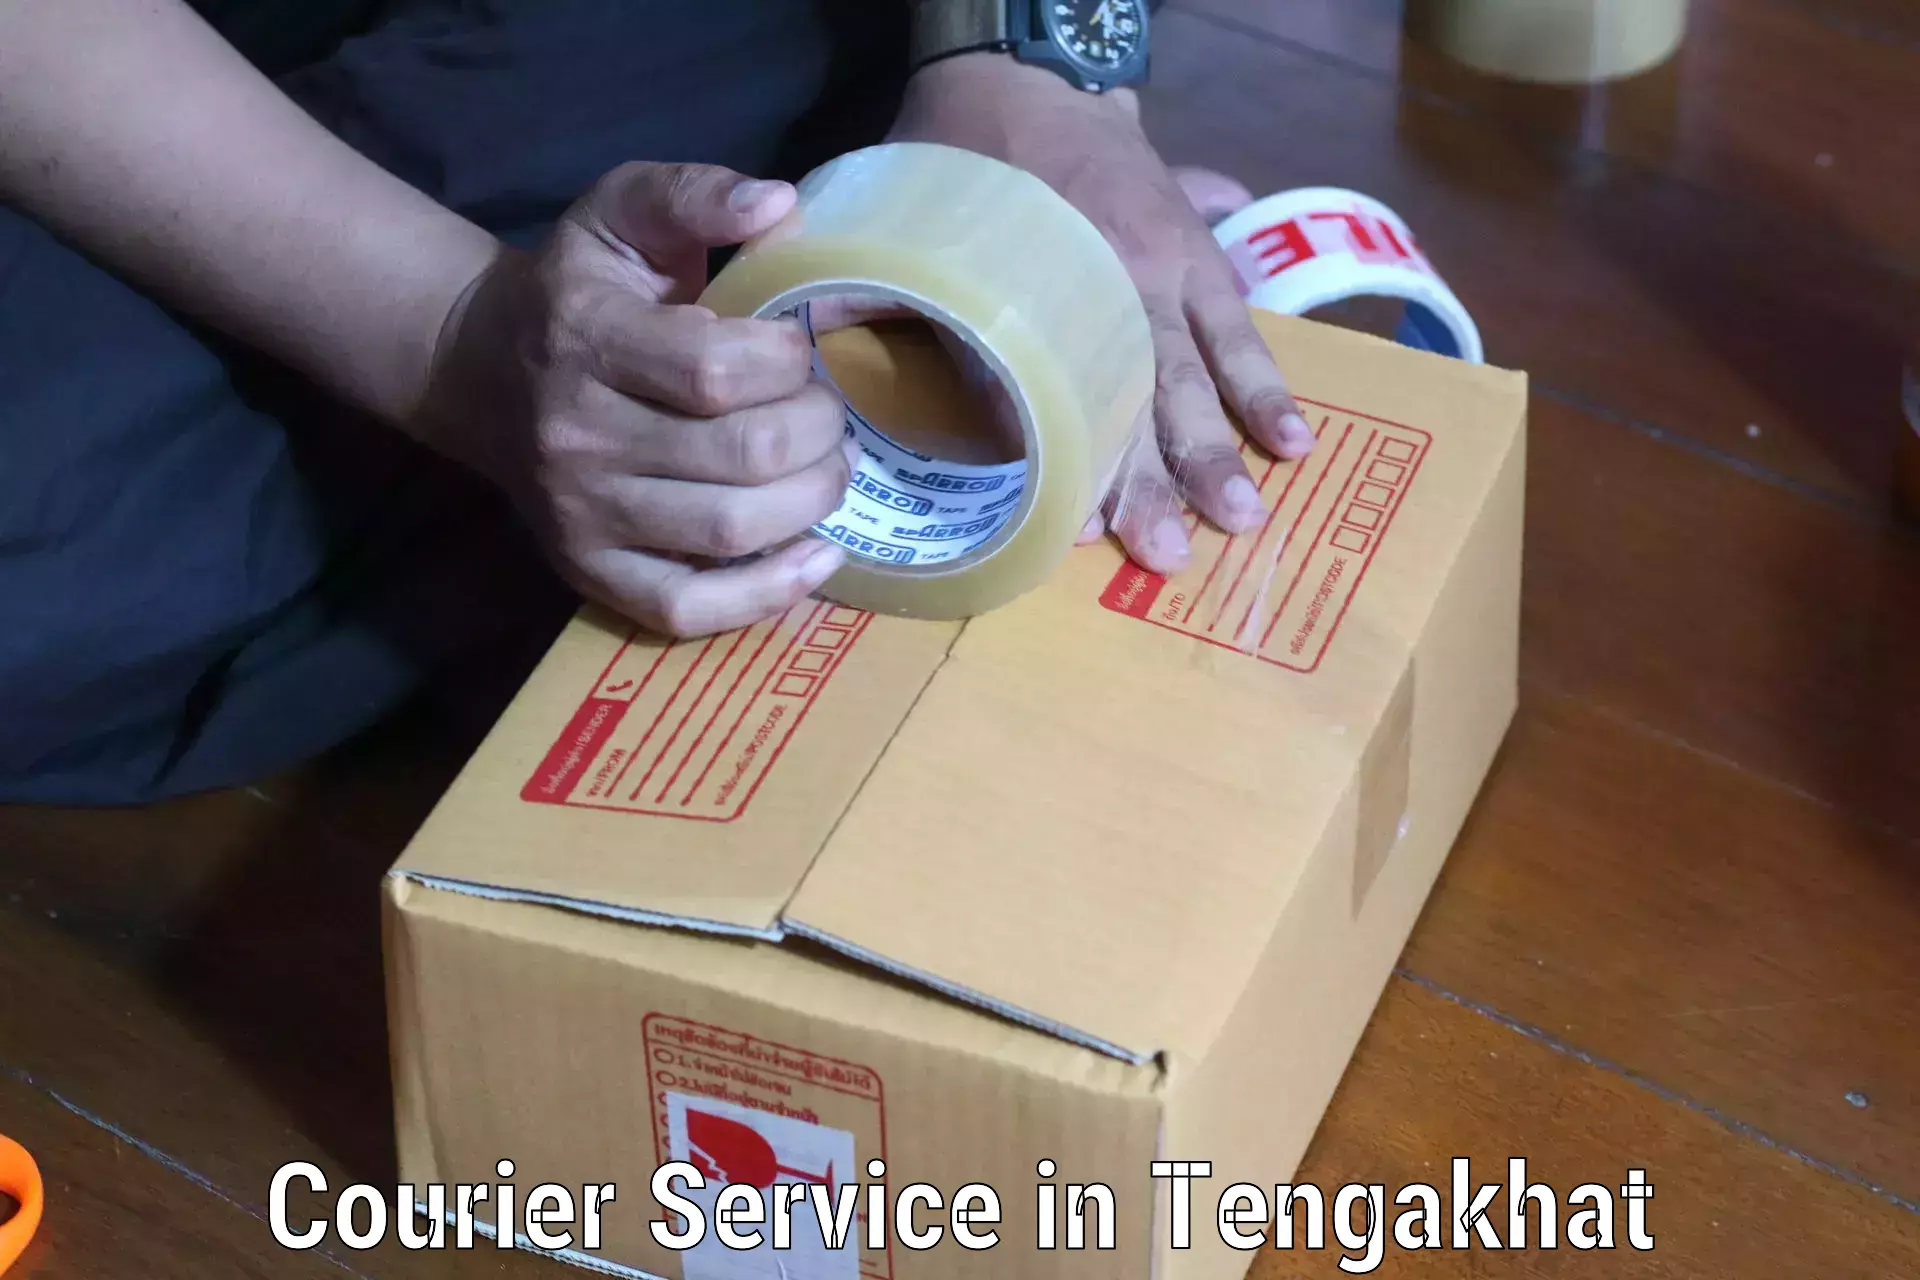 Wholesale parcel delivery in Tengakhat